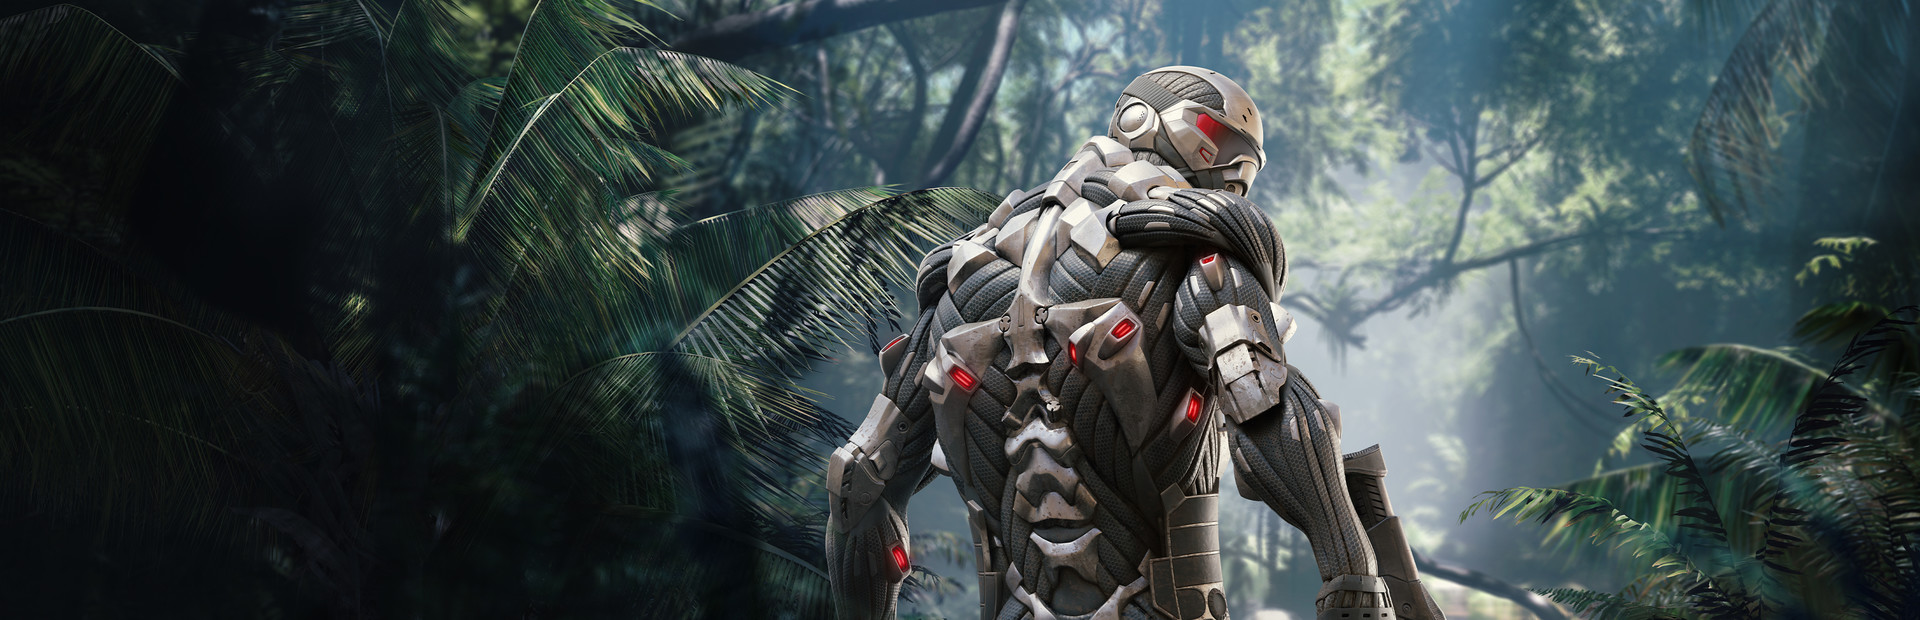 Crysis Remastered cover image